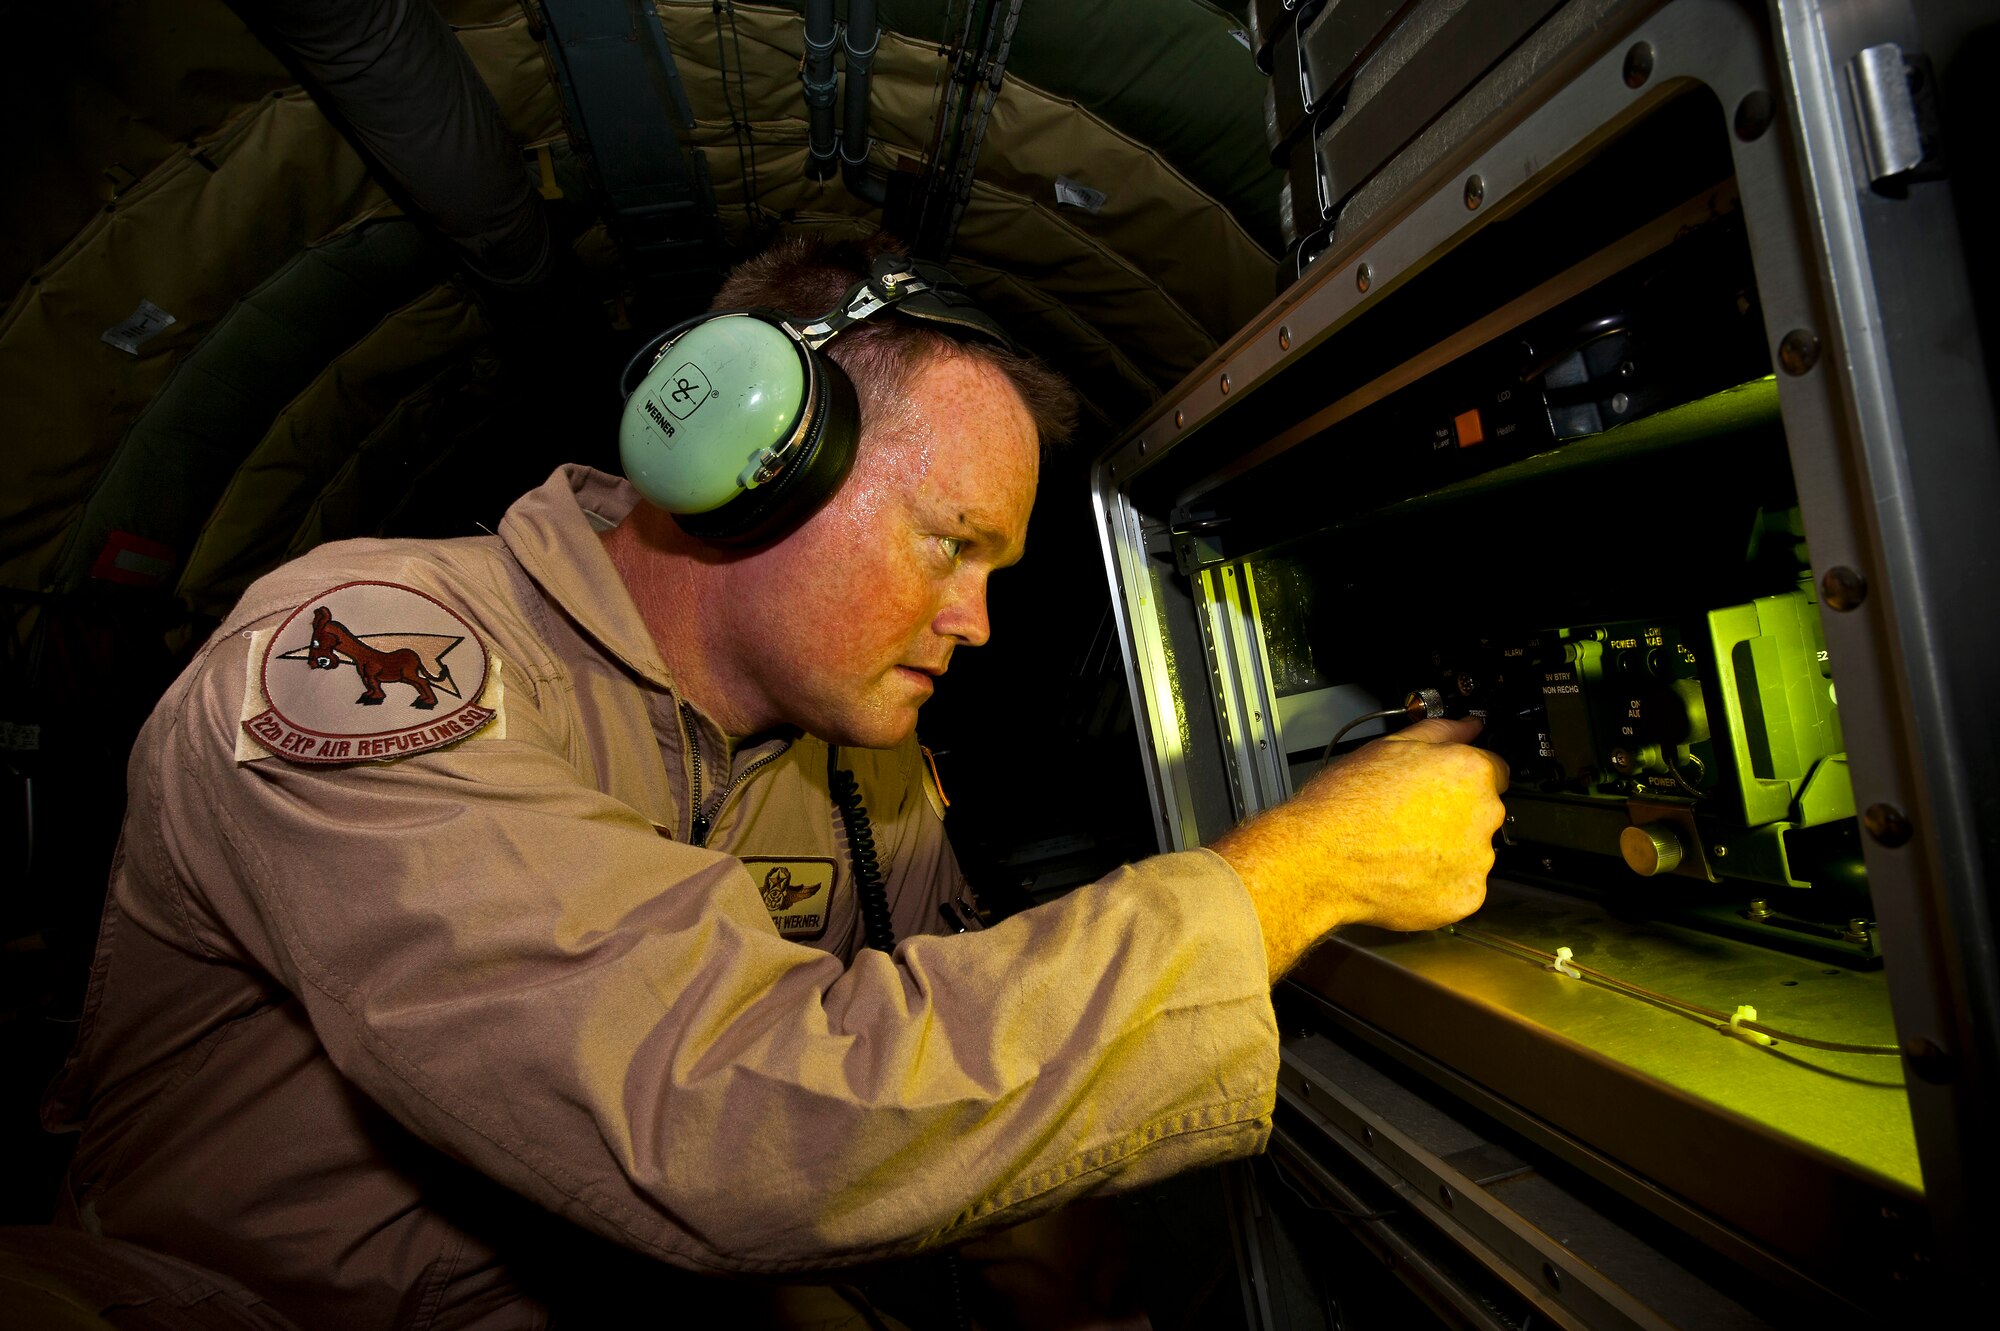 Senior Master Sgt. Keith Werner adjusts a Roll-On Beyond Line of Sight Enhancement, or ROBE, data link system at the Transit Center at Manas, Kyrgyzstan, Aug. 31, 2012. The 22nd Expeditionary Air Refueling Squadron KC-135 crew assisted a stricken fighter aircraft by guiding it through a series of specific maneuvers to reset the on-board flight computers and allowing the pilot to regain effective communications and navigational instruments. Werner is a 22 EARS boom operator deployed out of the 137th Air Refueling Wing, Oklahoma Air National Guard, and is a native of Oklahoma City. (U.S. Air Force photo/Senior Airman Brett Clashman)